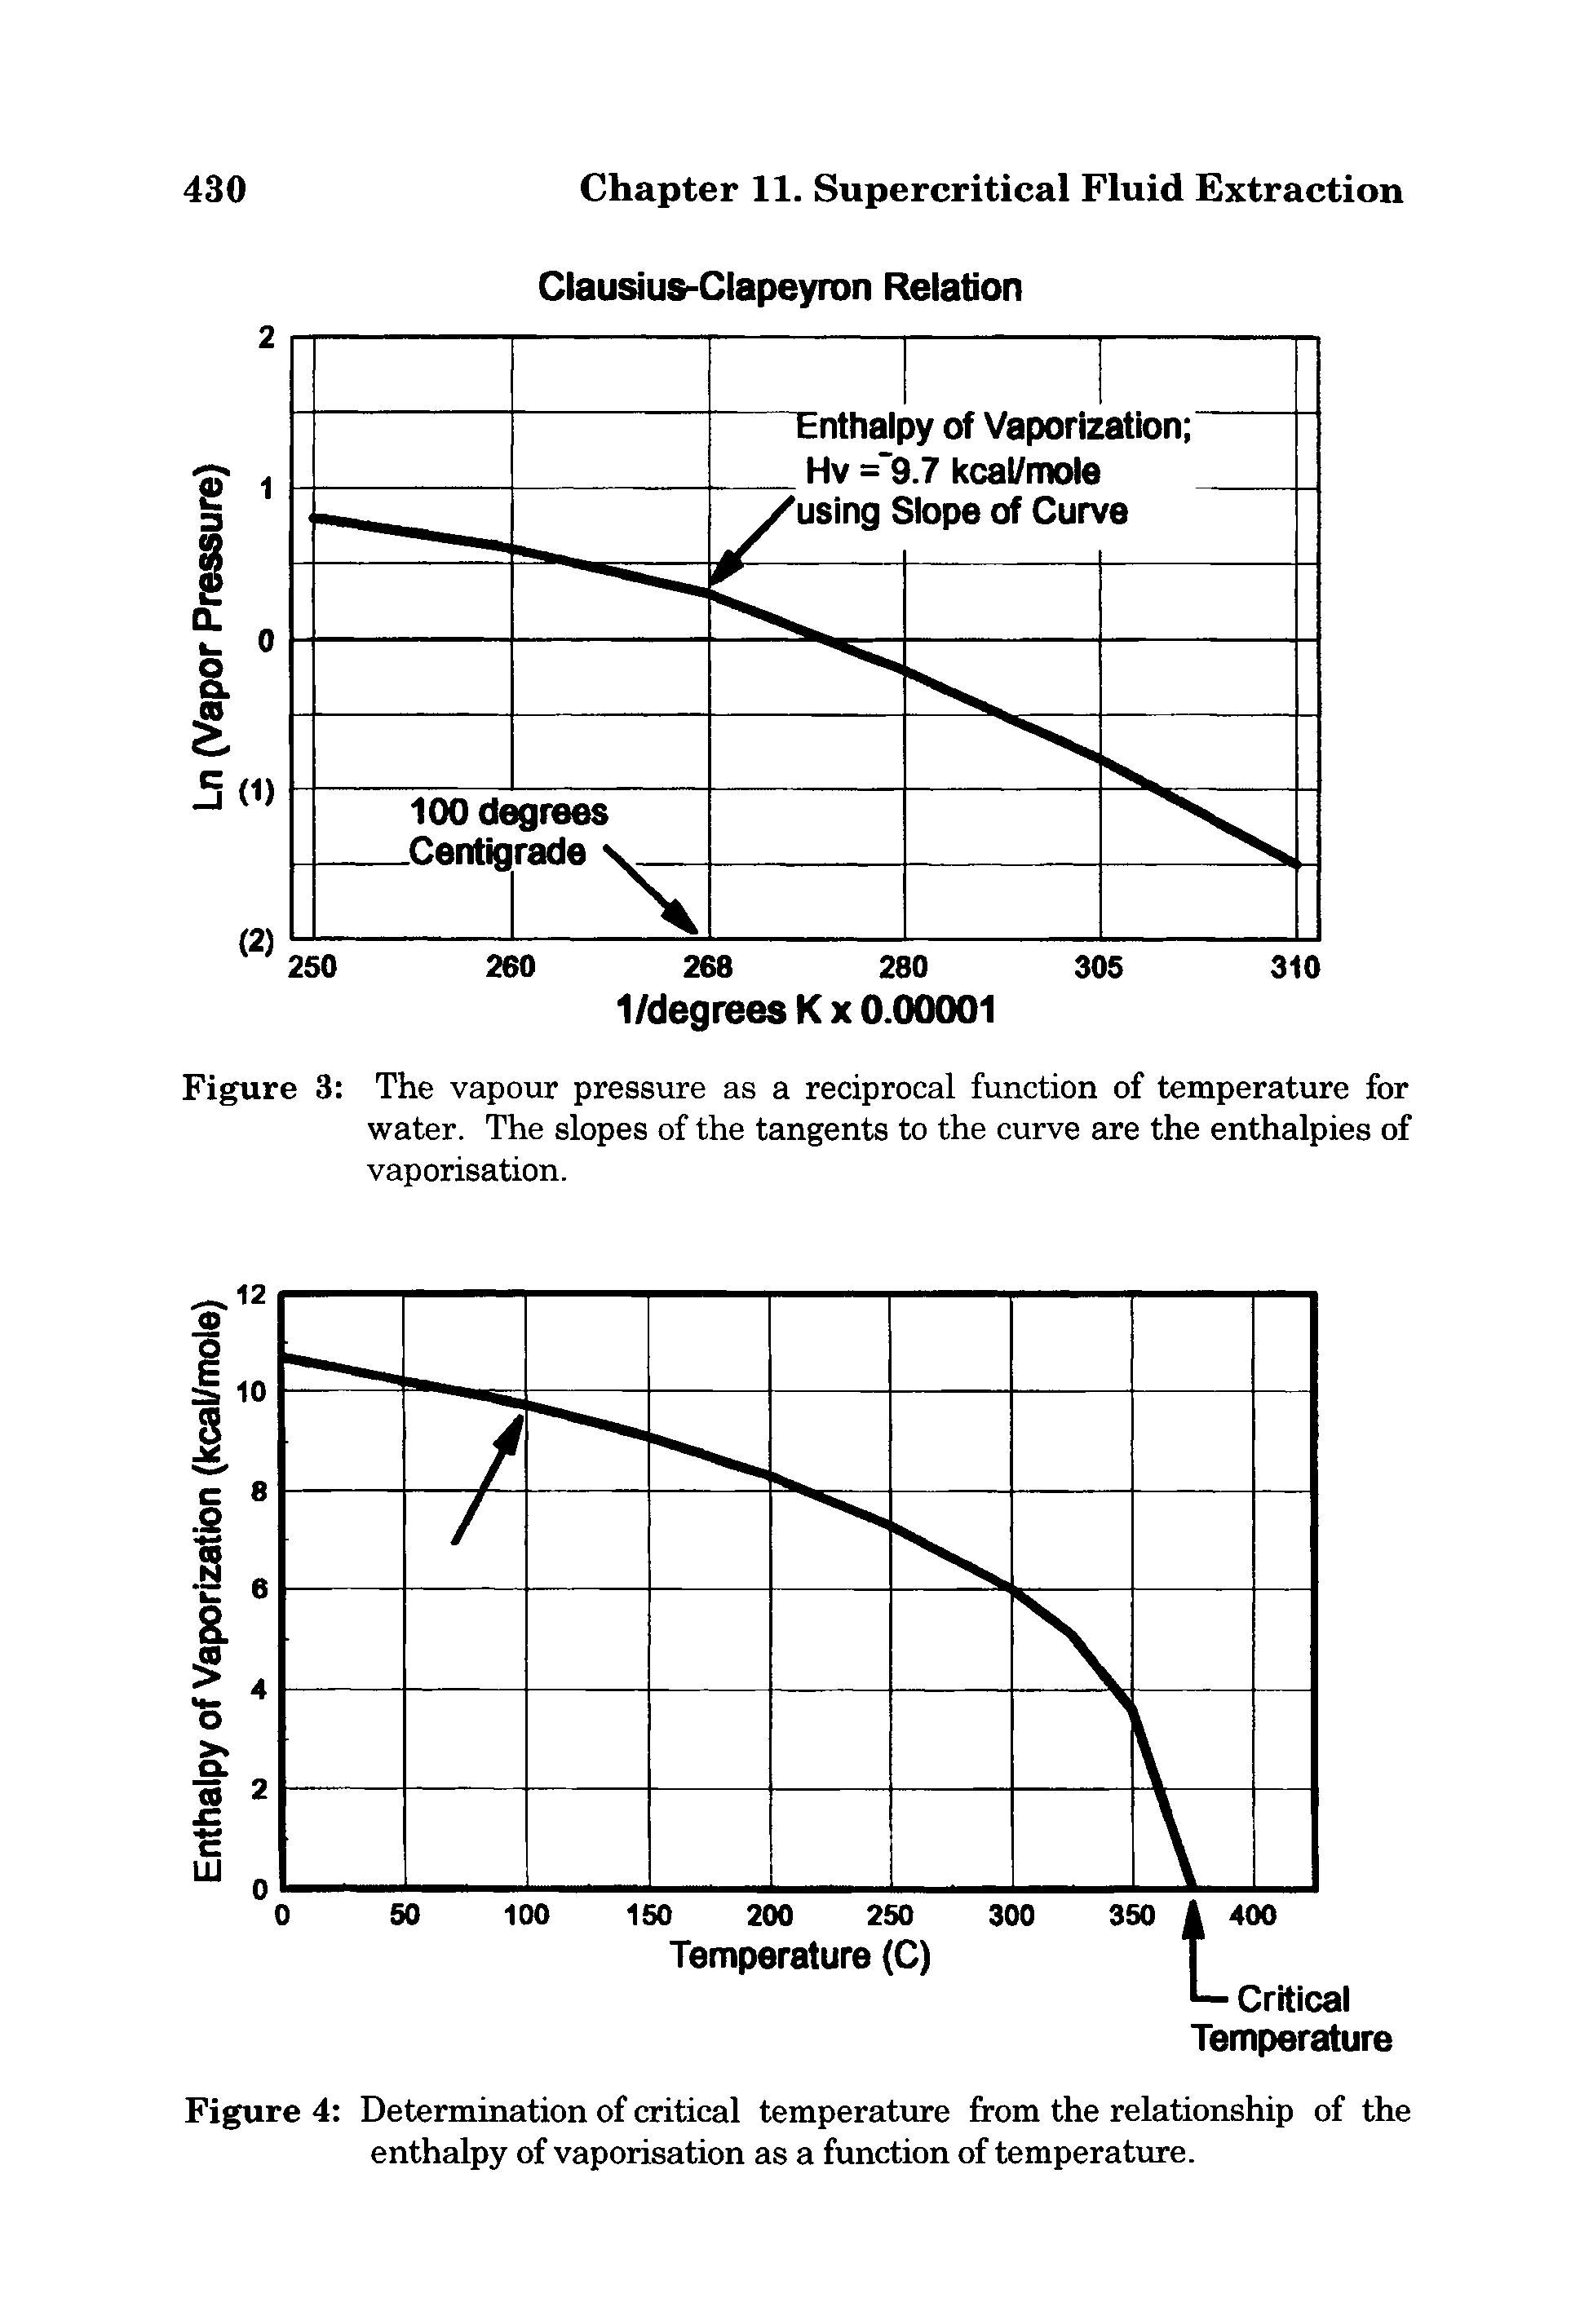 Figure 3 The vapour pressure as a reciprocal function of temperature for water. The slopes of the tangents to the curve are the enthalpies of vaporisation.